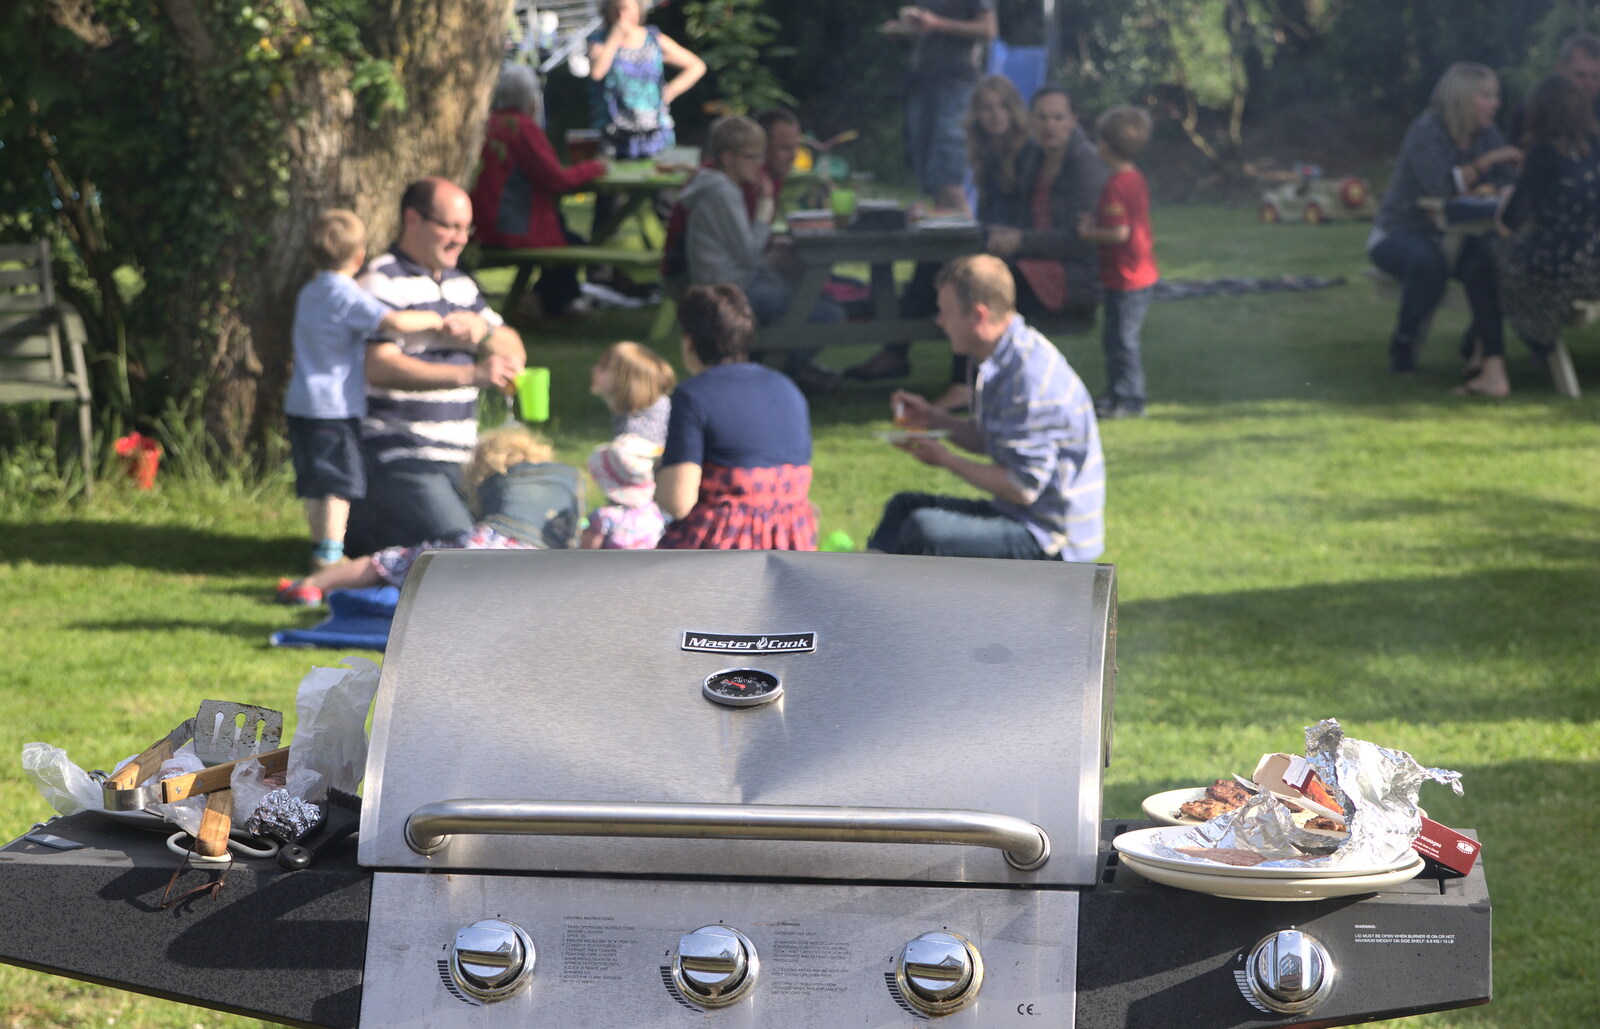 The dented barbeque in action from A "Not a Birthday Party" Barbeque, Brome, Suffolk - 25th May 2014